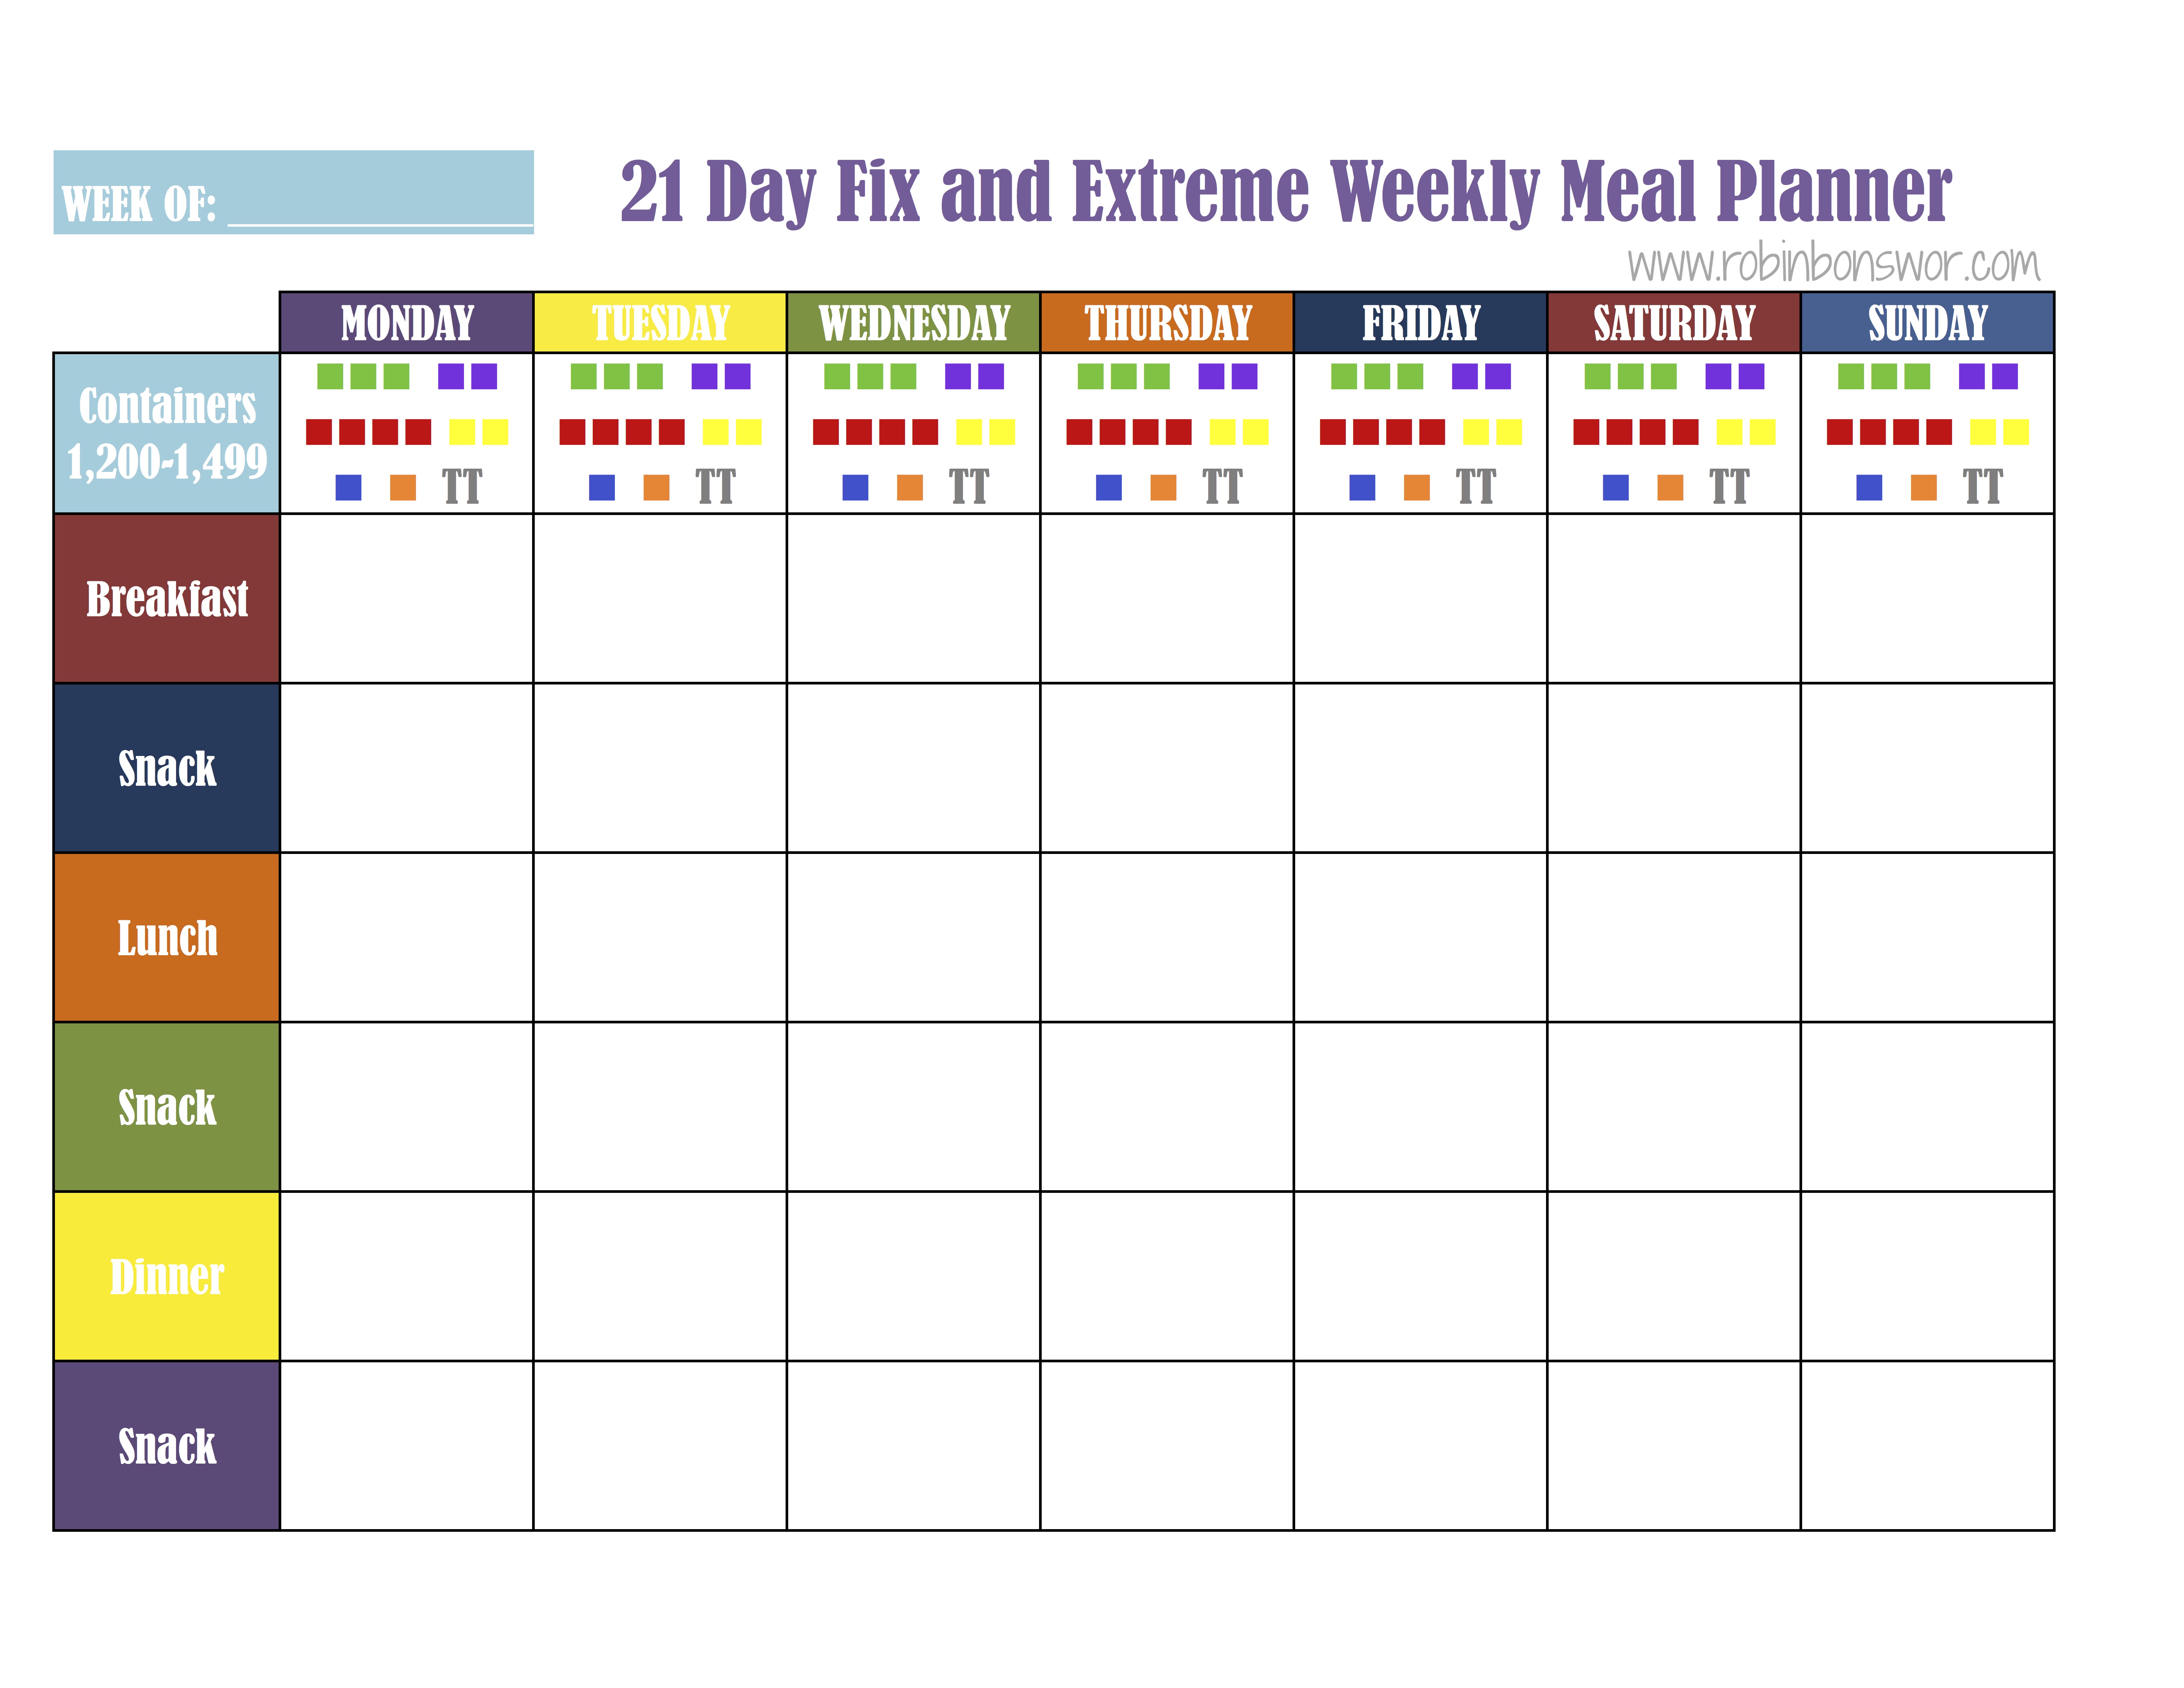 21 Day Fix Meal Plan Tools | Get Fit. Lose Weight. Feel Like You Again.